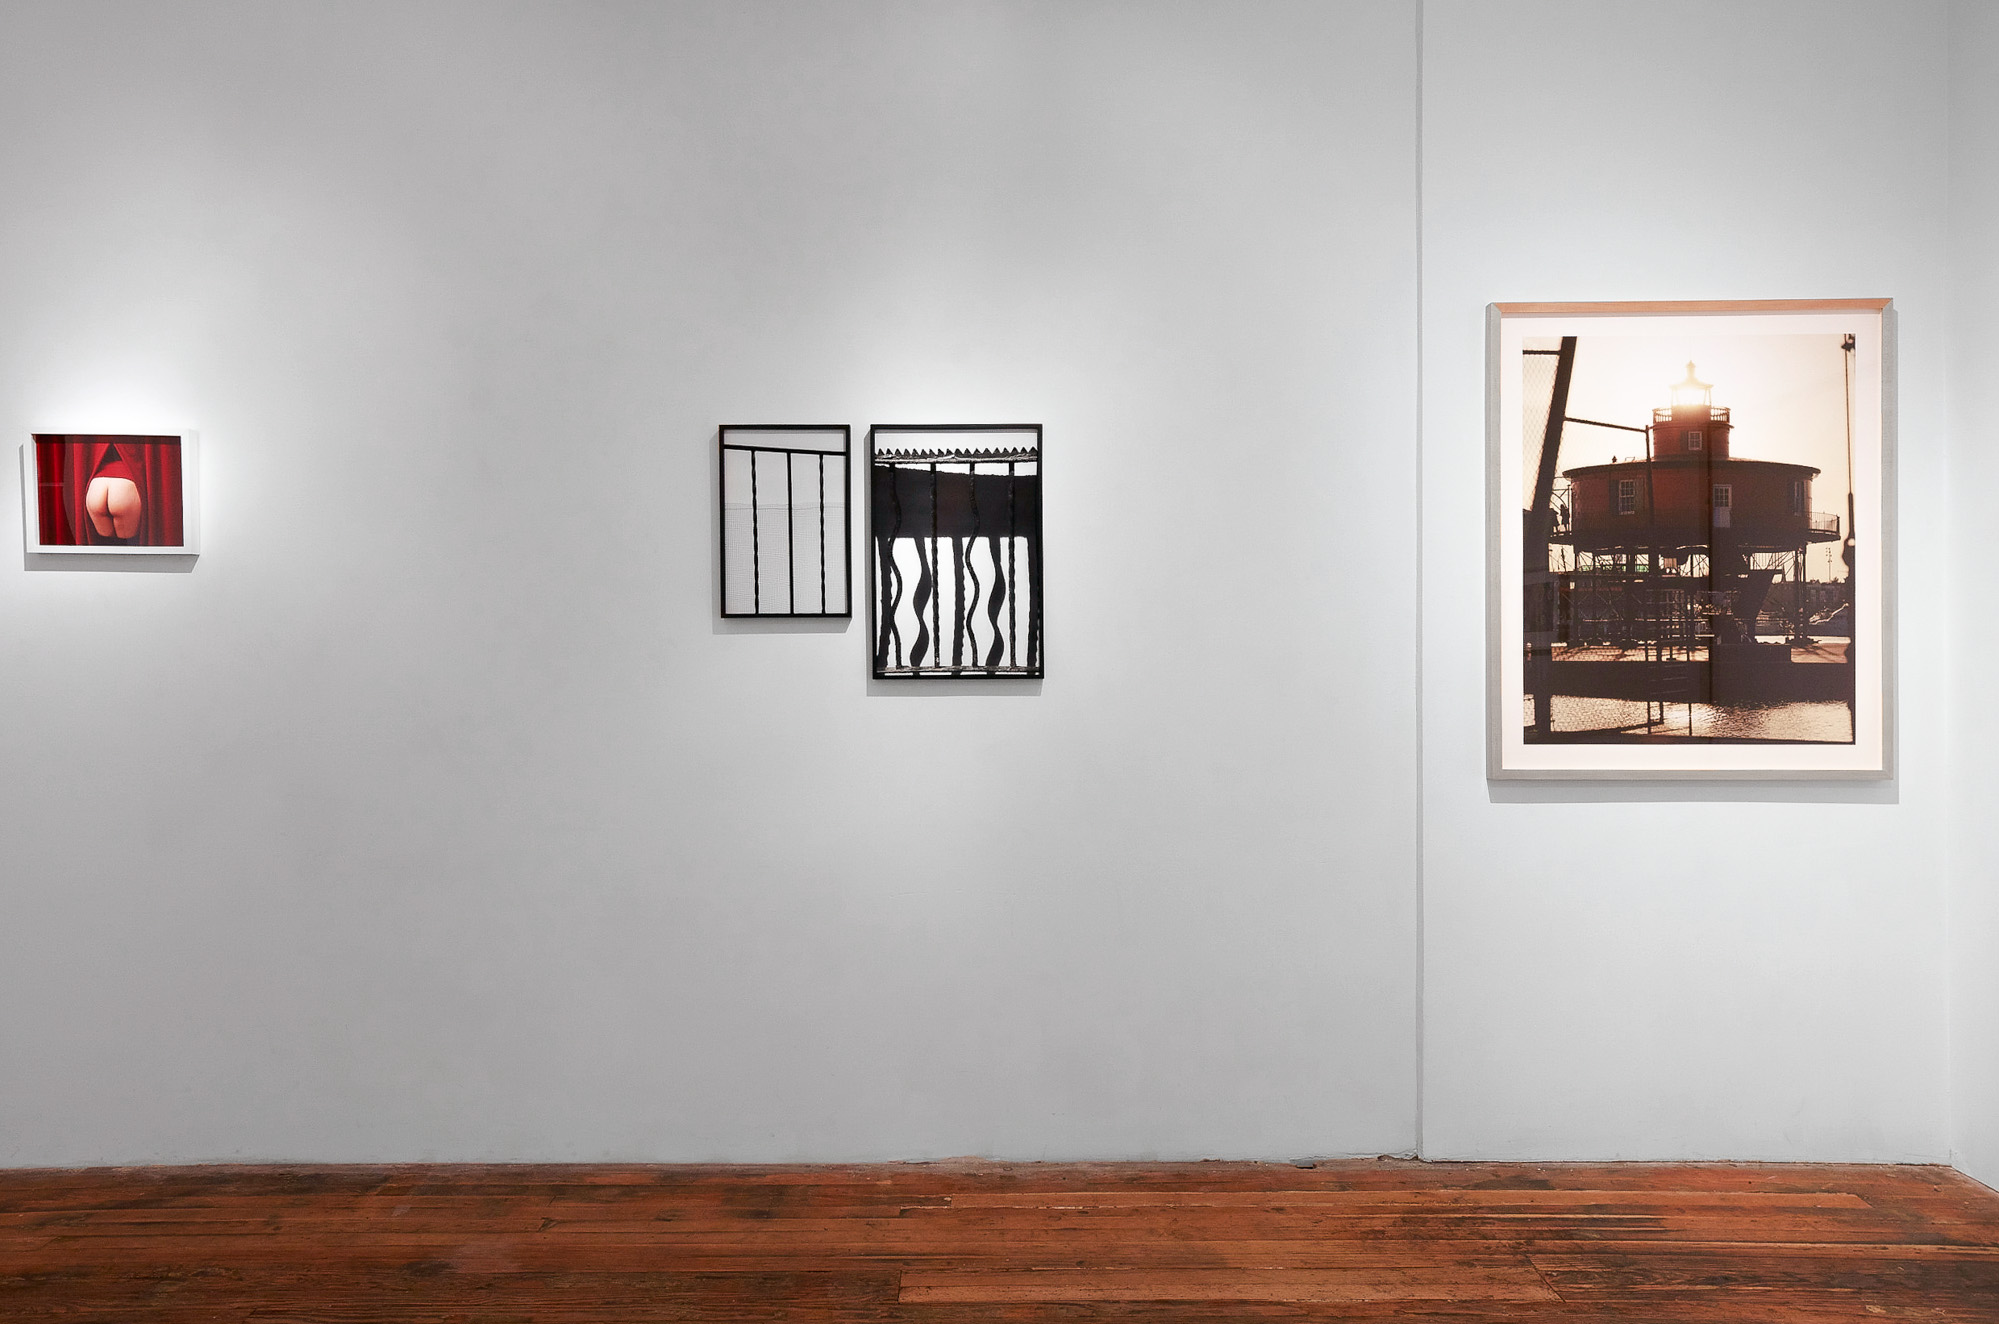   Bed-Stuy Gates  in  High Summer,  Exhibition view, Foley Gallery, NY, 2016 